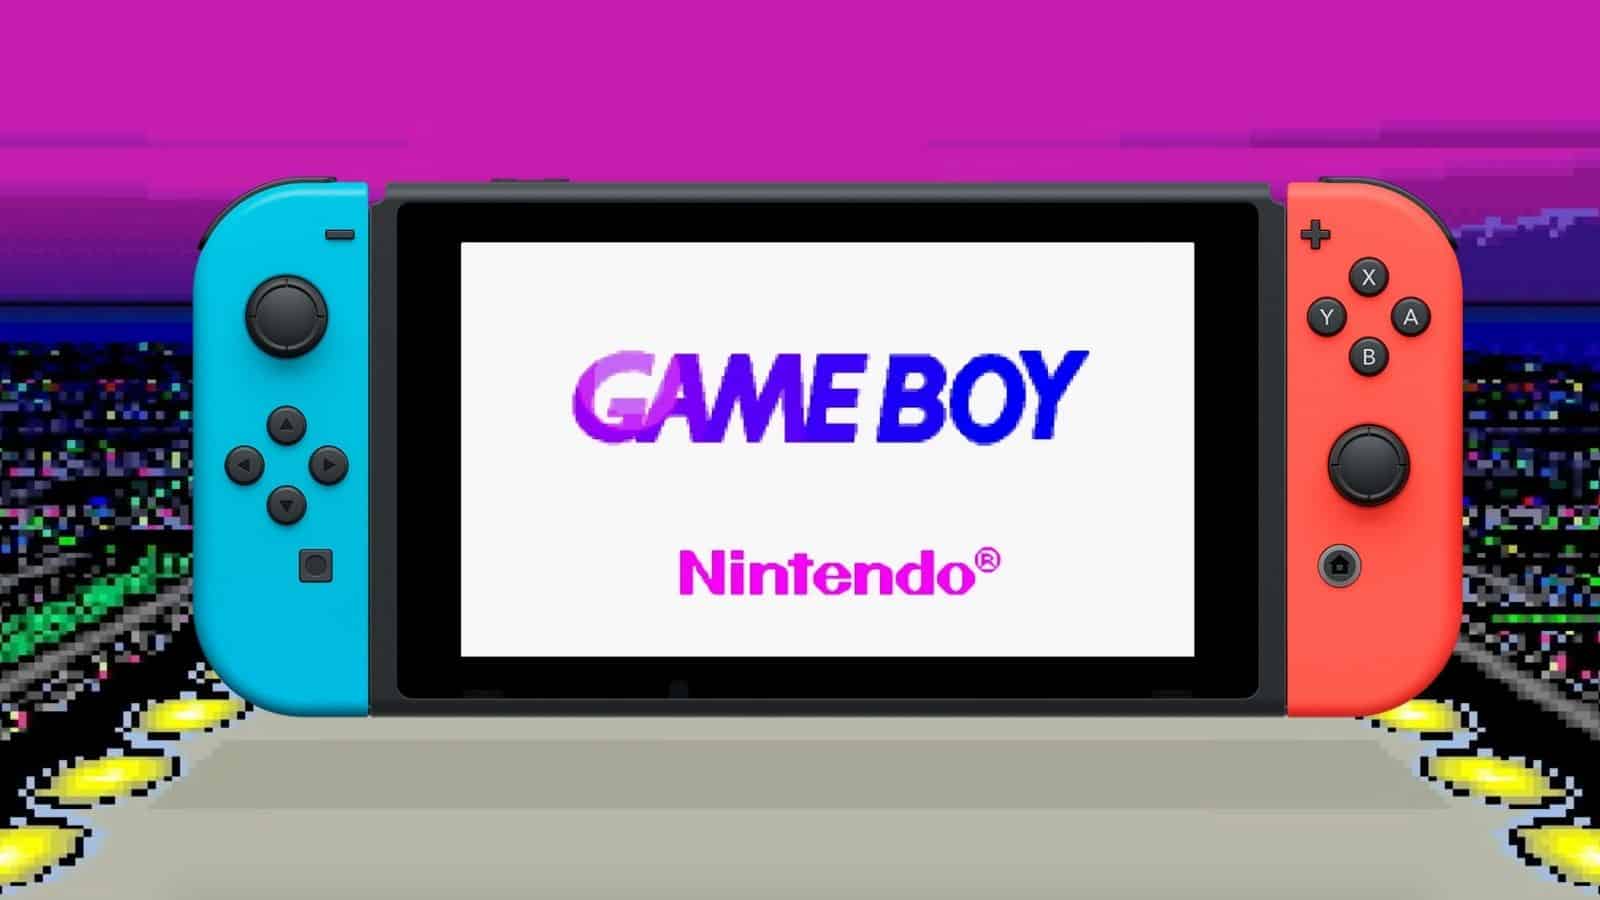 Official Gameboy Advance emulator leaked for Nintendo Switch